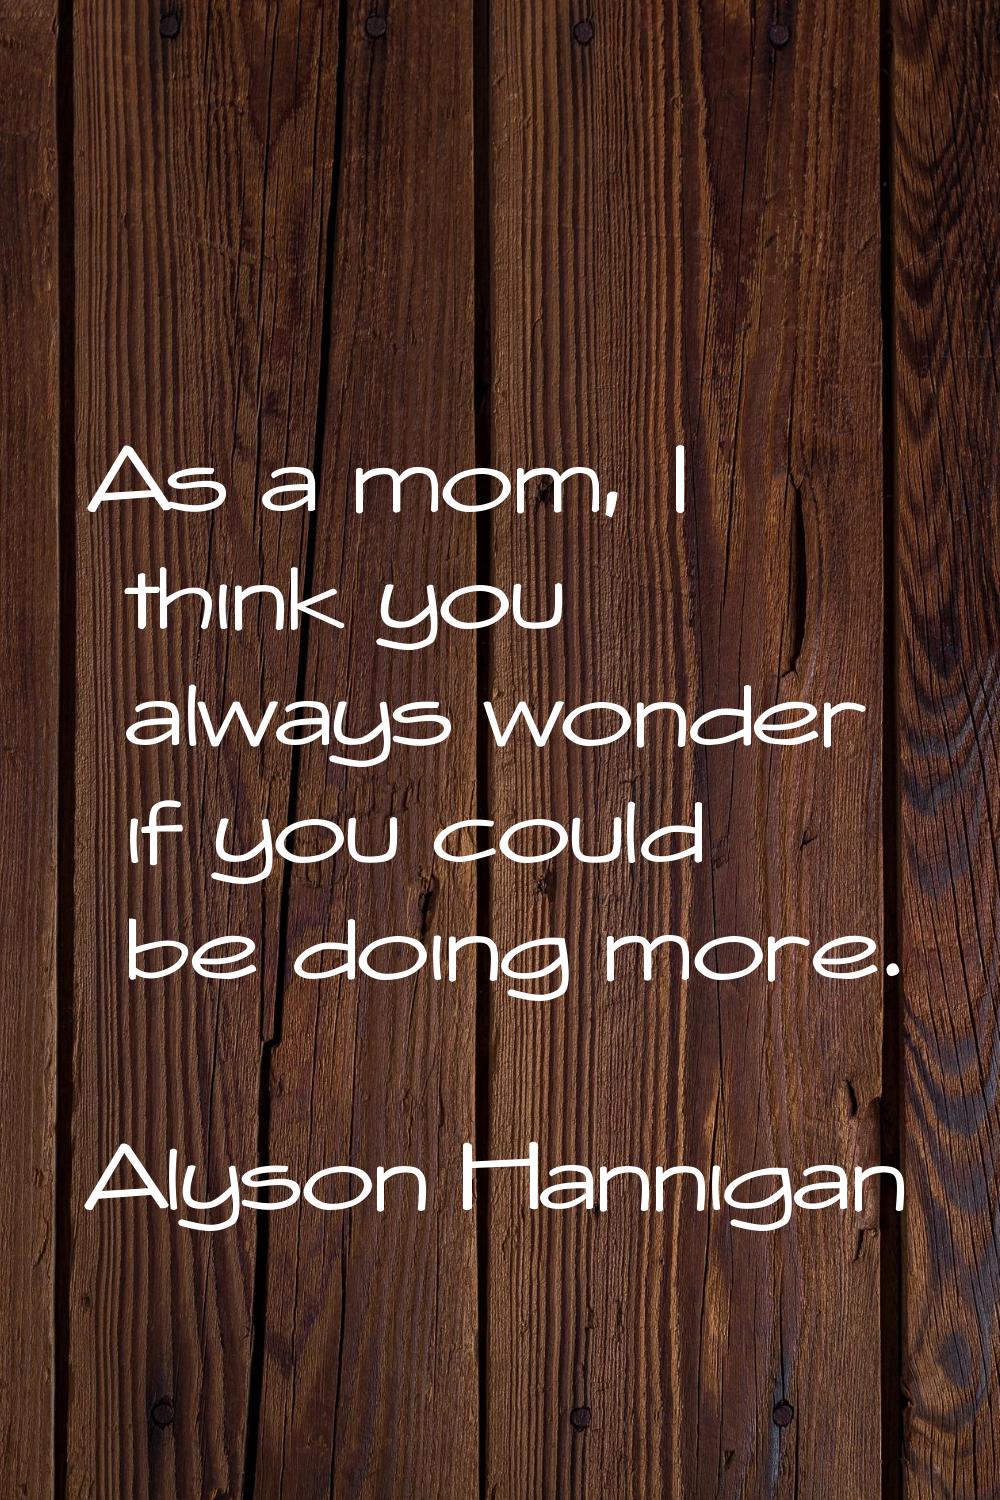 As a mom, I think you always wonder if you could be doing more.